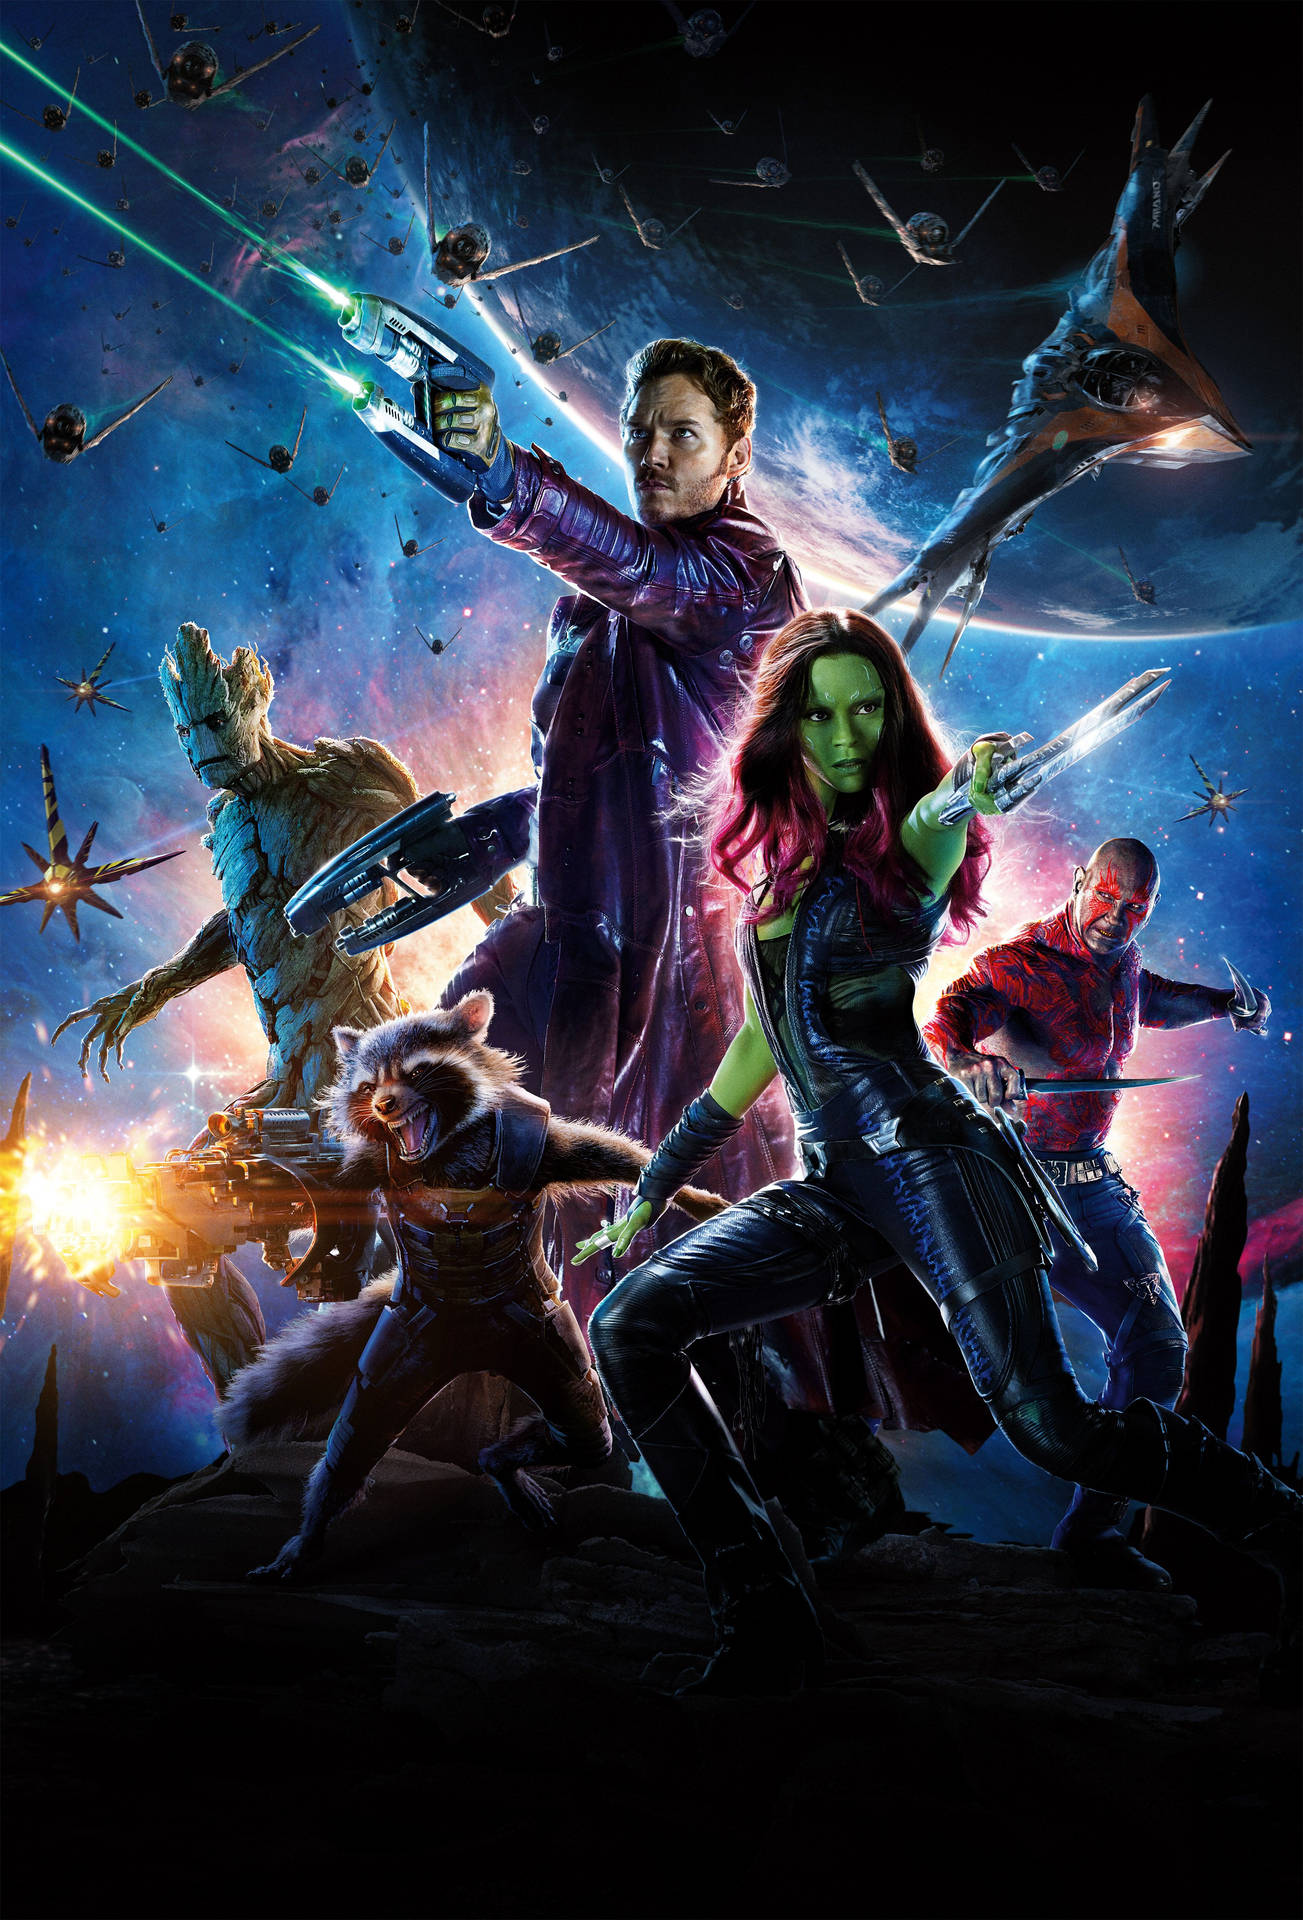 Free Guardians Of The Galaxy Wallpapers Downloads, [100+] Guardians Of The Galaxy Wallpapers for FREE